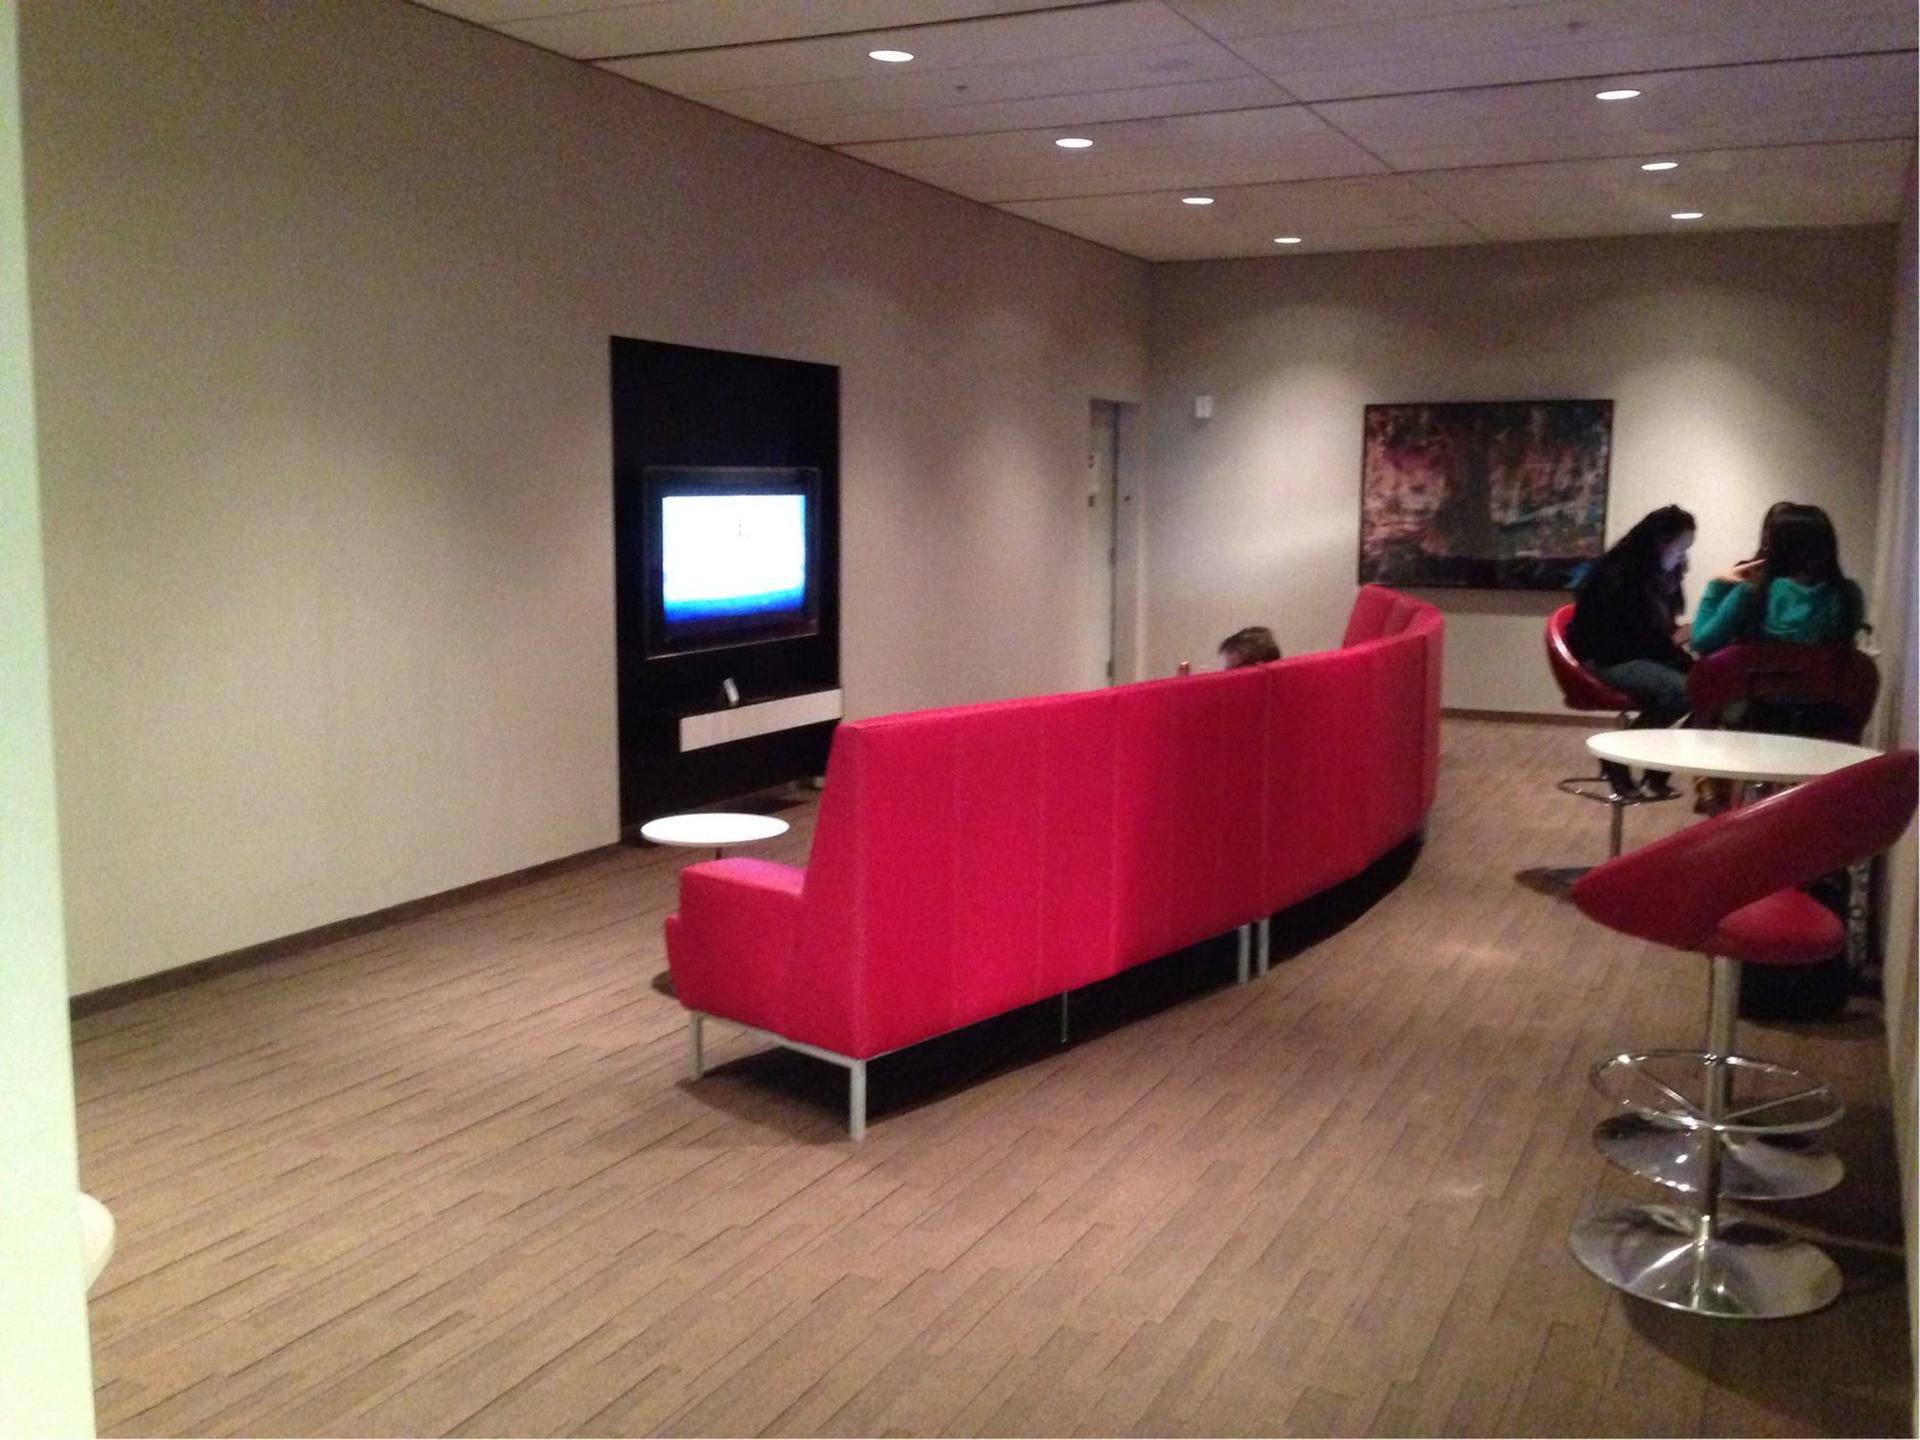 Air Canada Maple Leaf Lounge image 5 of 30